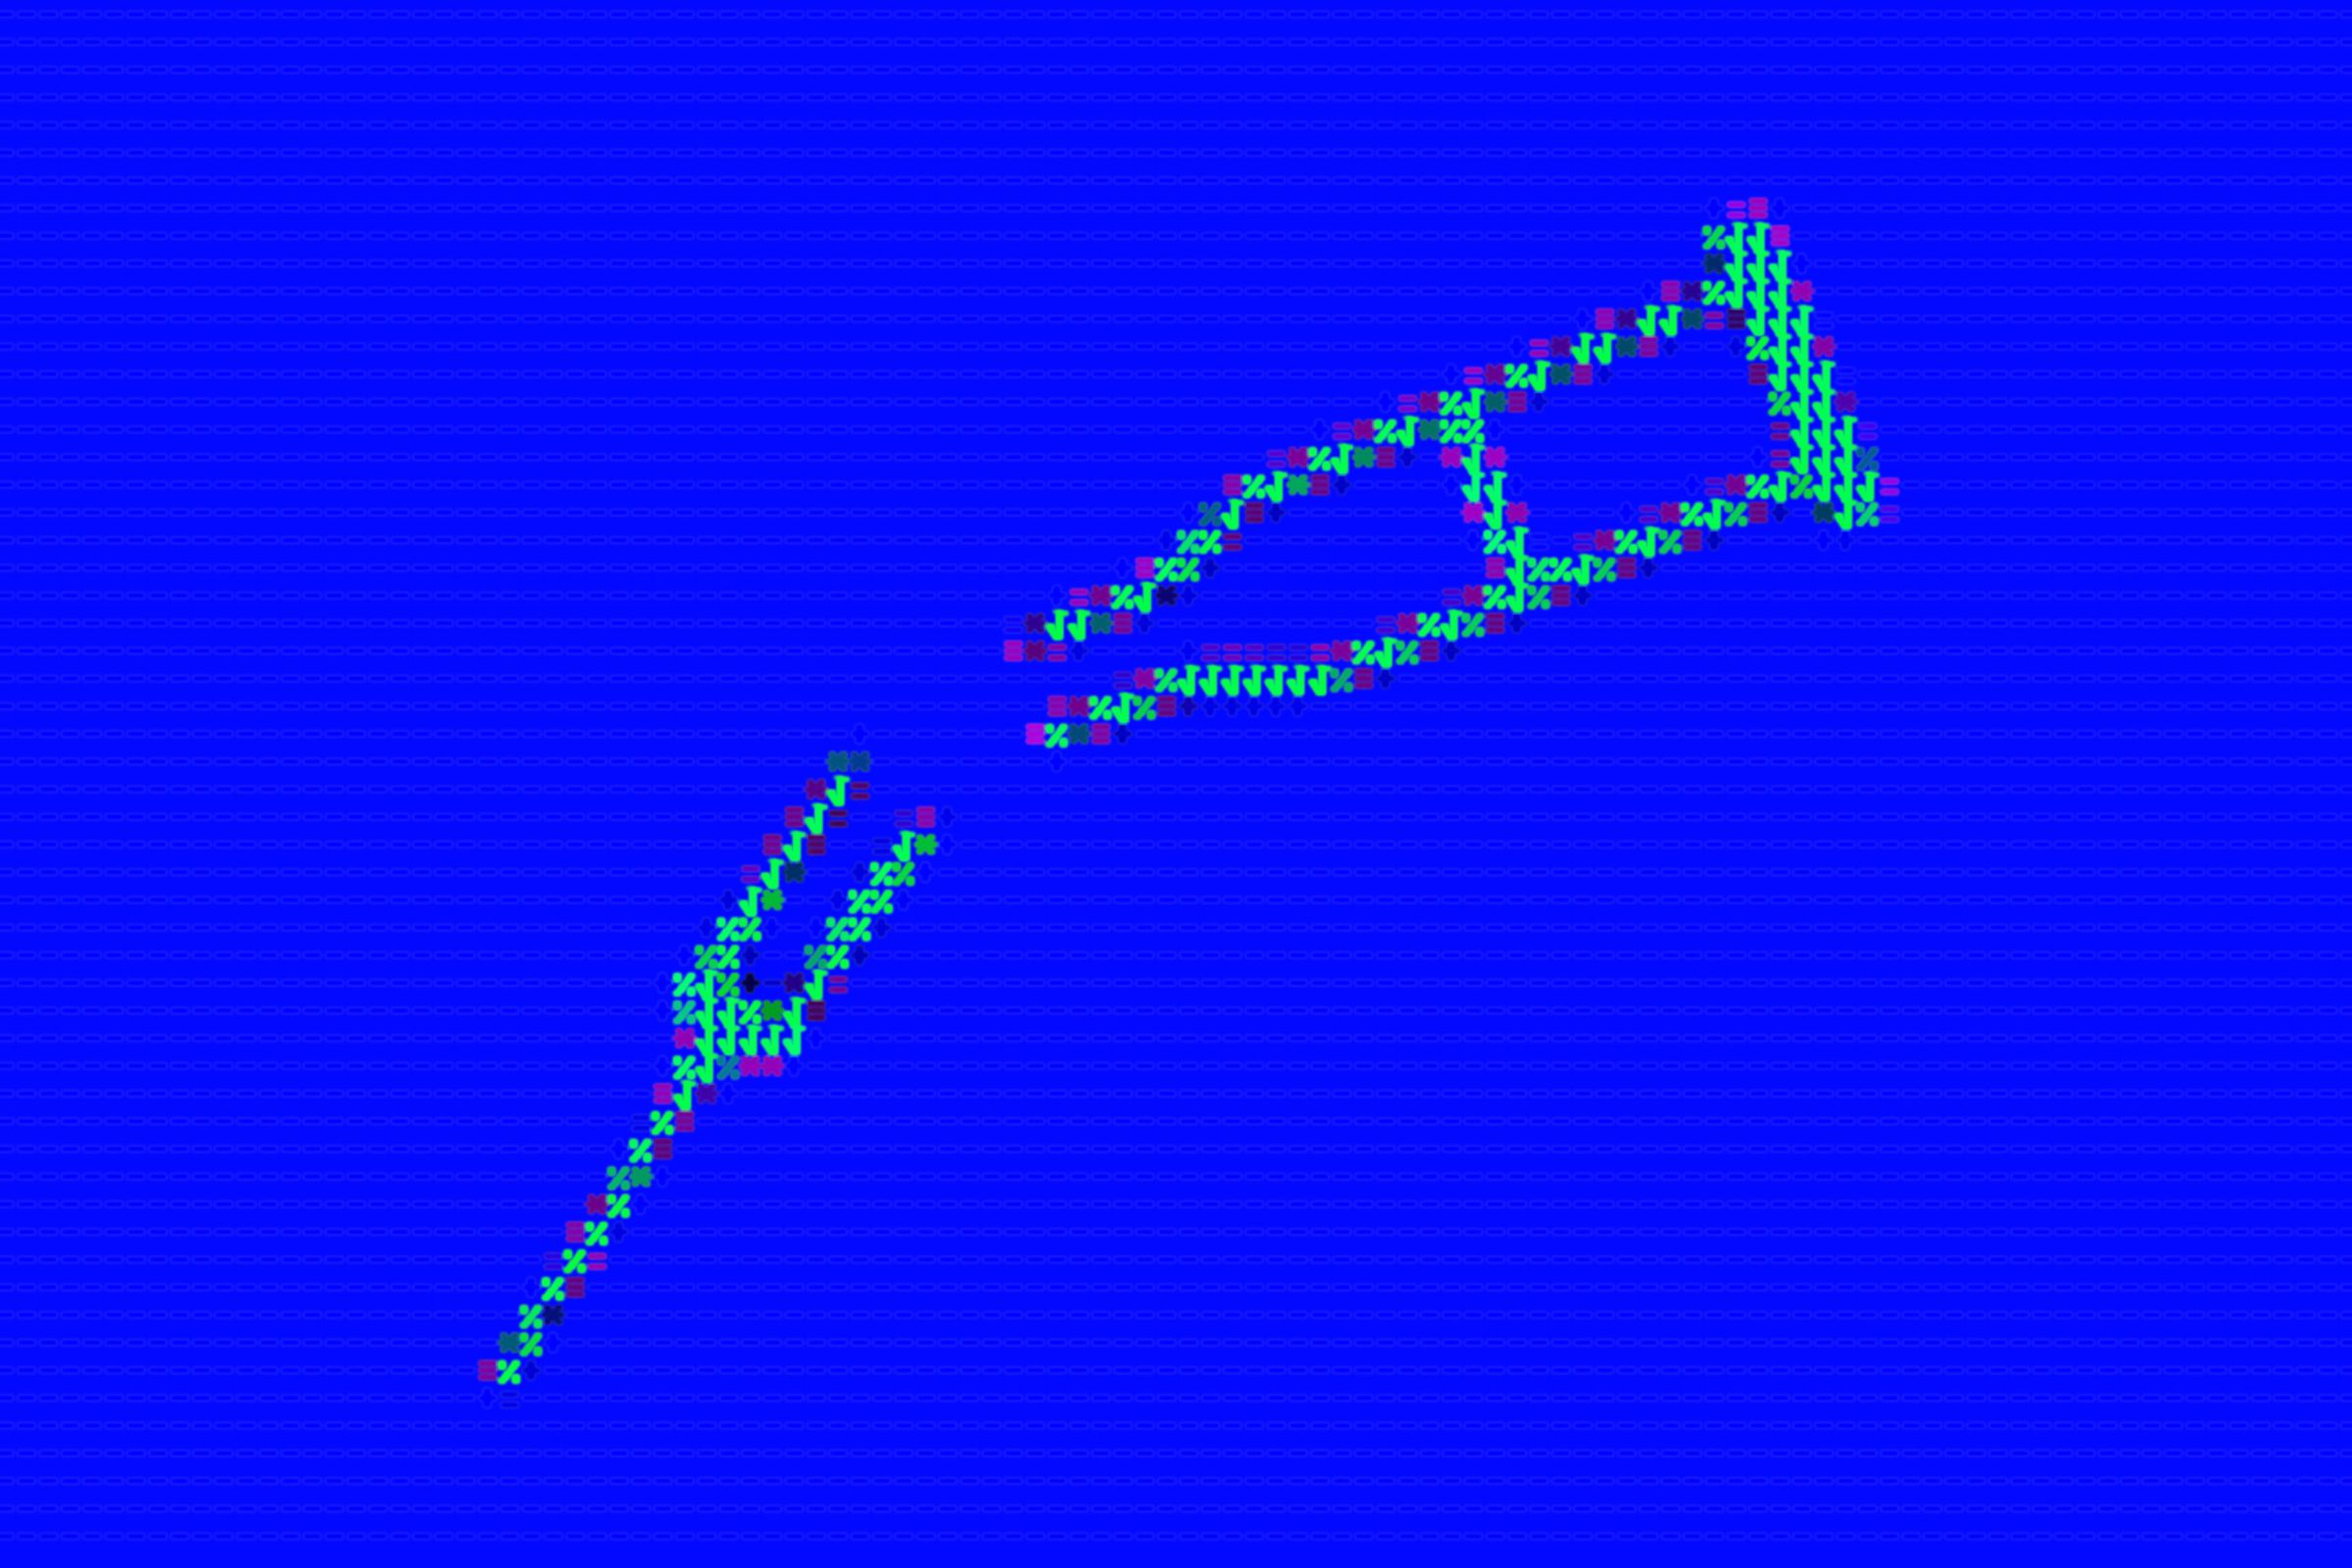 Illustration of a broken crutch made out of code.